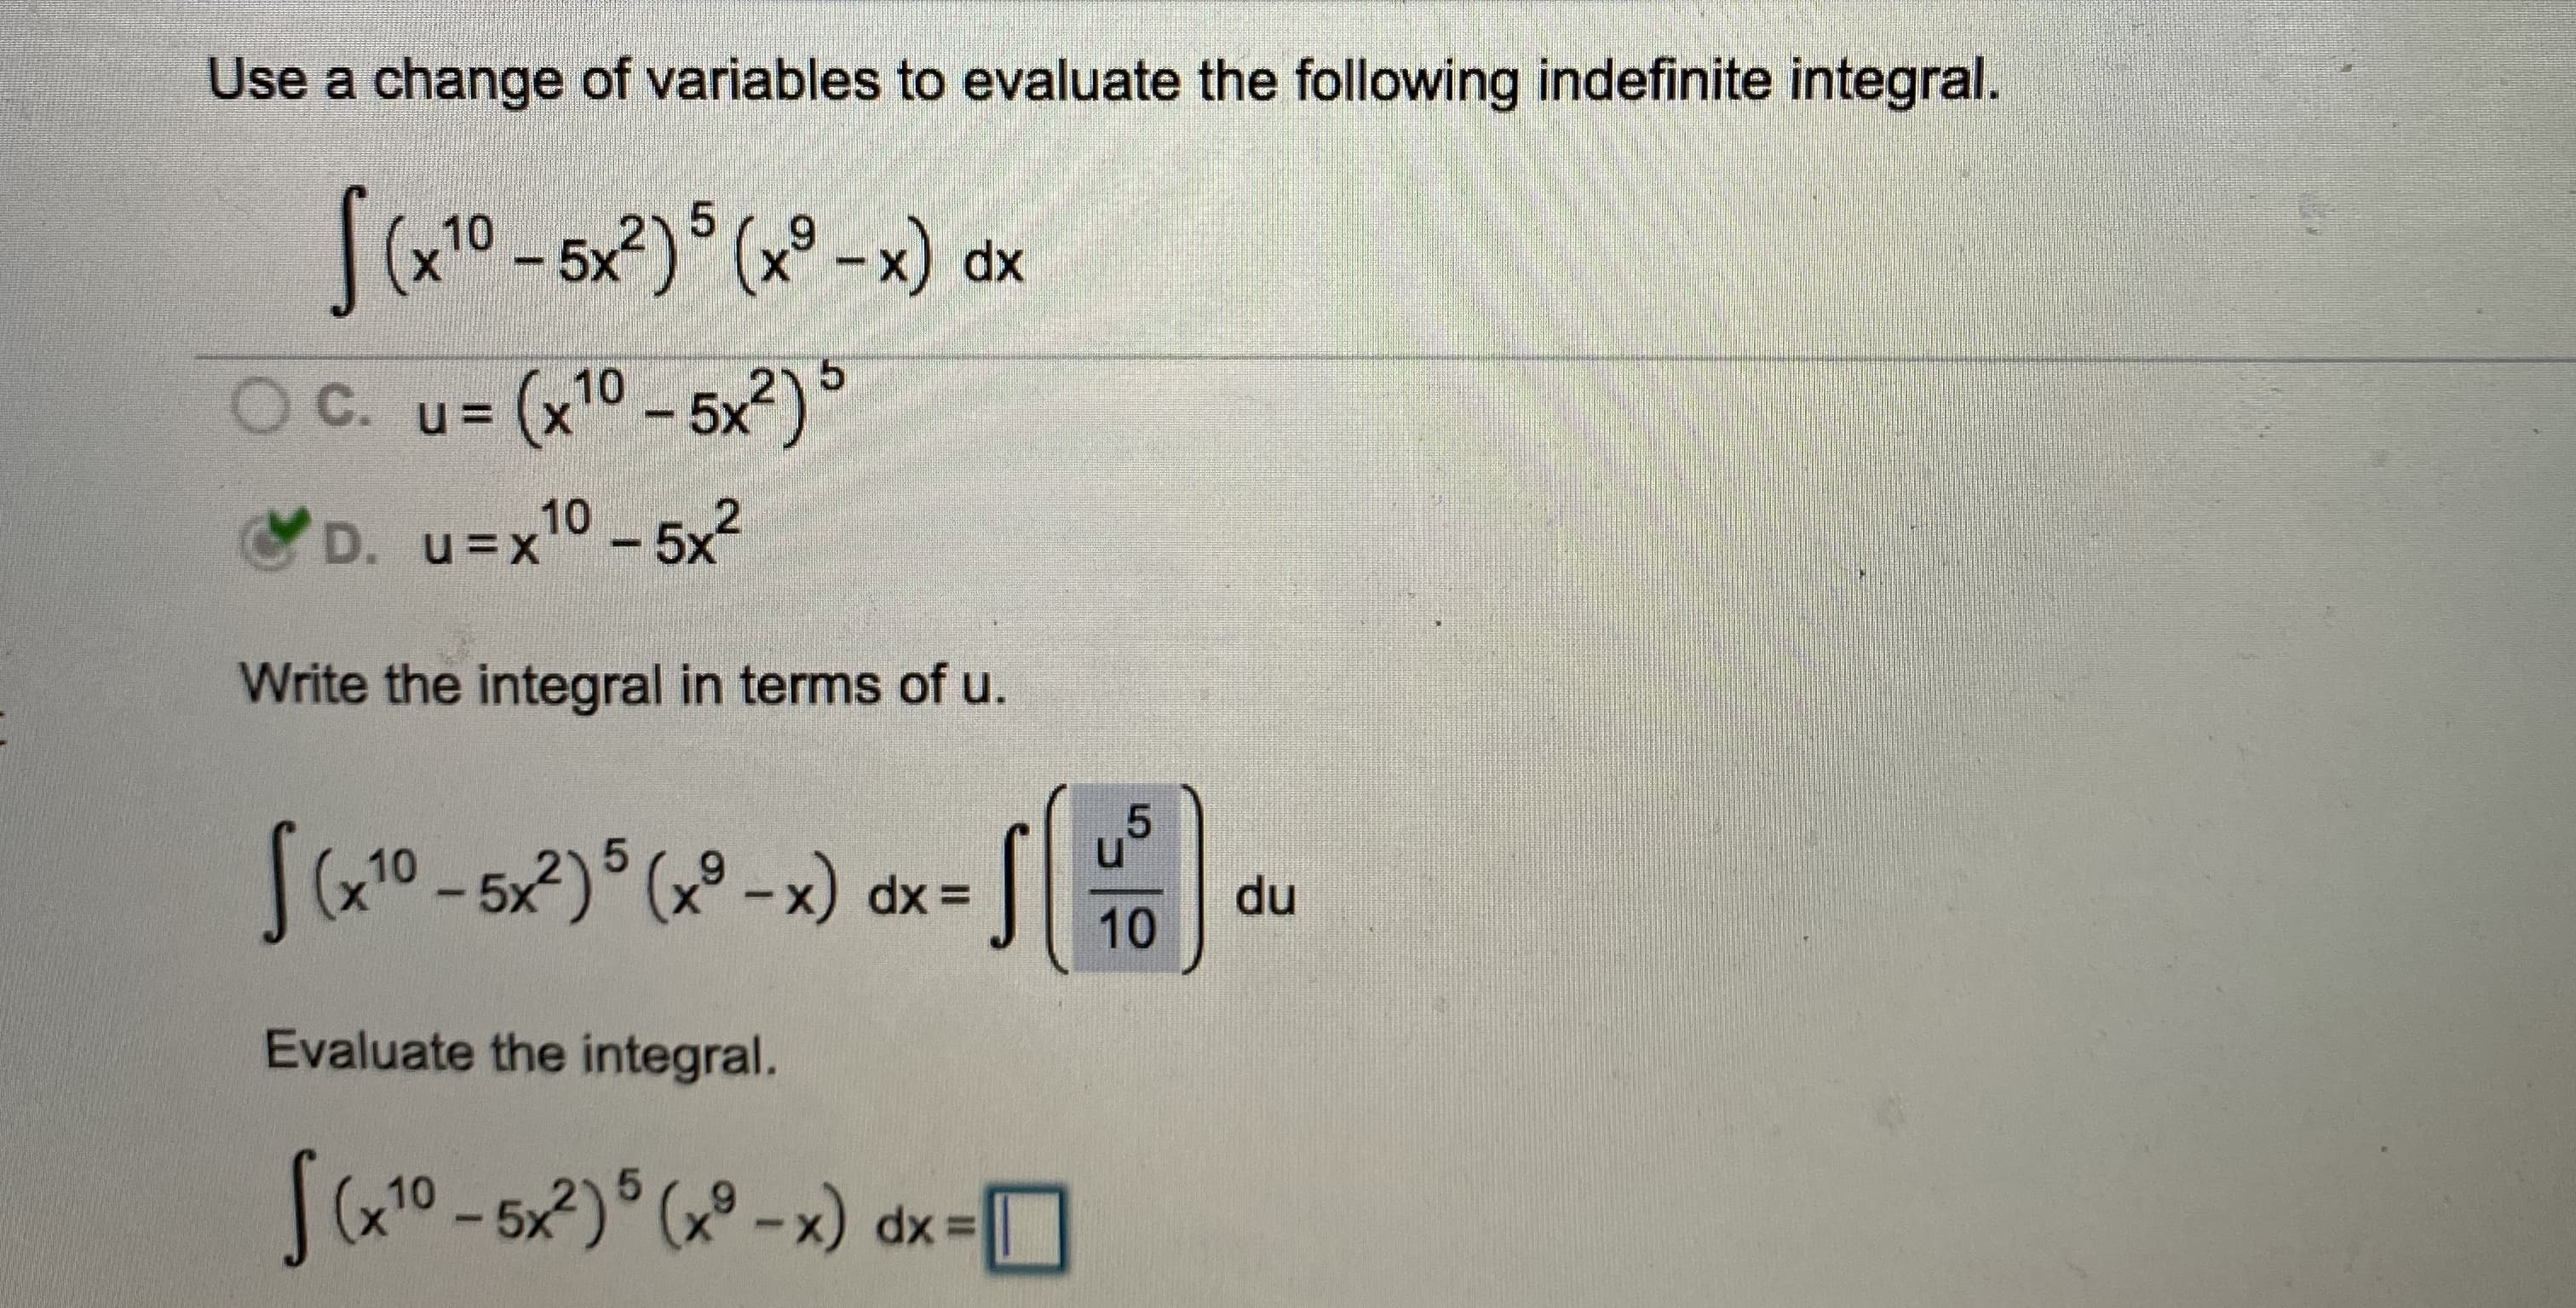 Use a change of variables to evaluate the following indefinite integral.
(x10-5x²) (x° -x) dx
X
